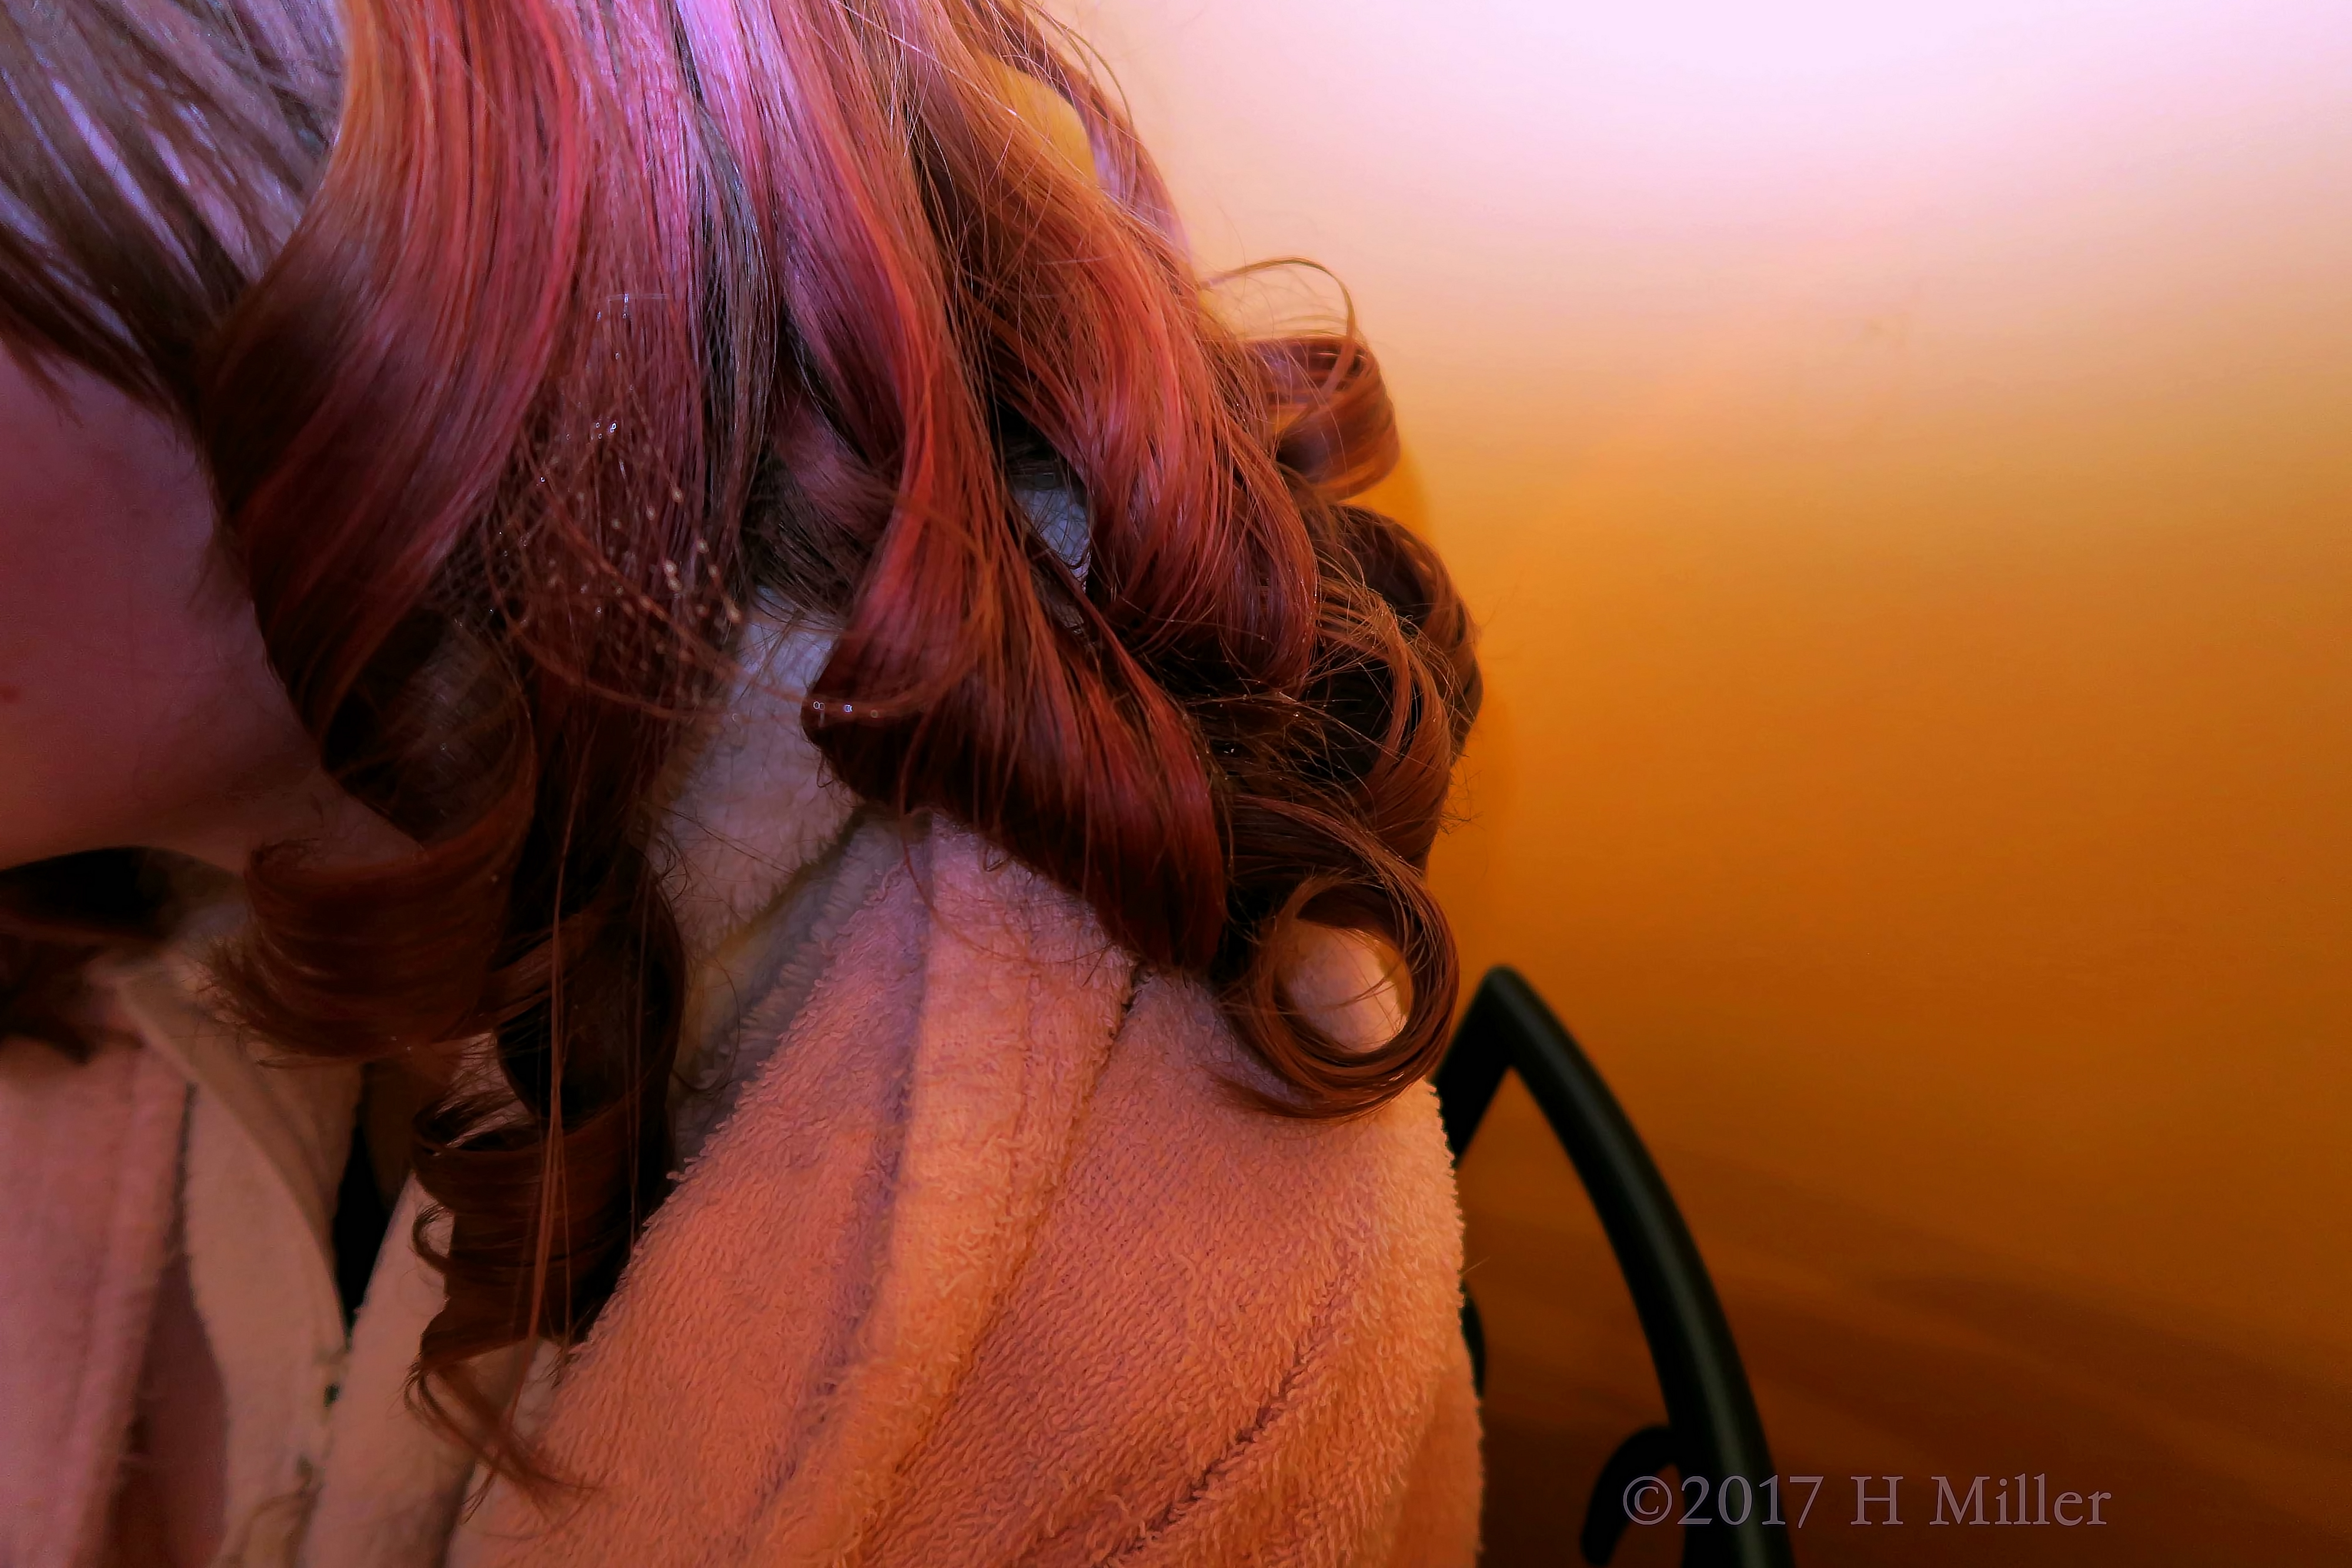 Closeup Of The Tight Curls And A Touch Of Red Girls Hairstyles.